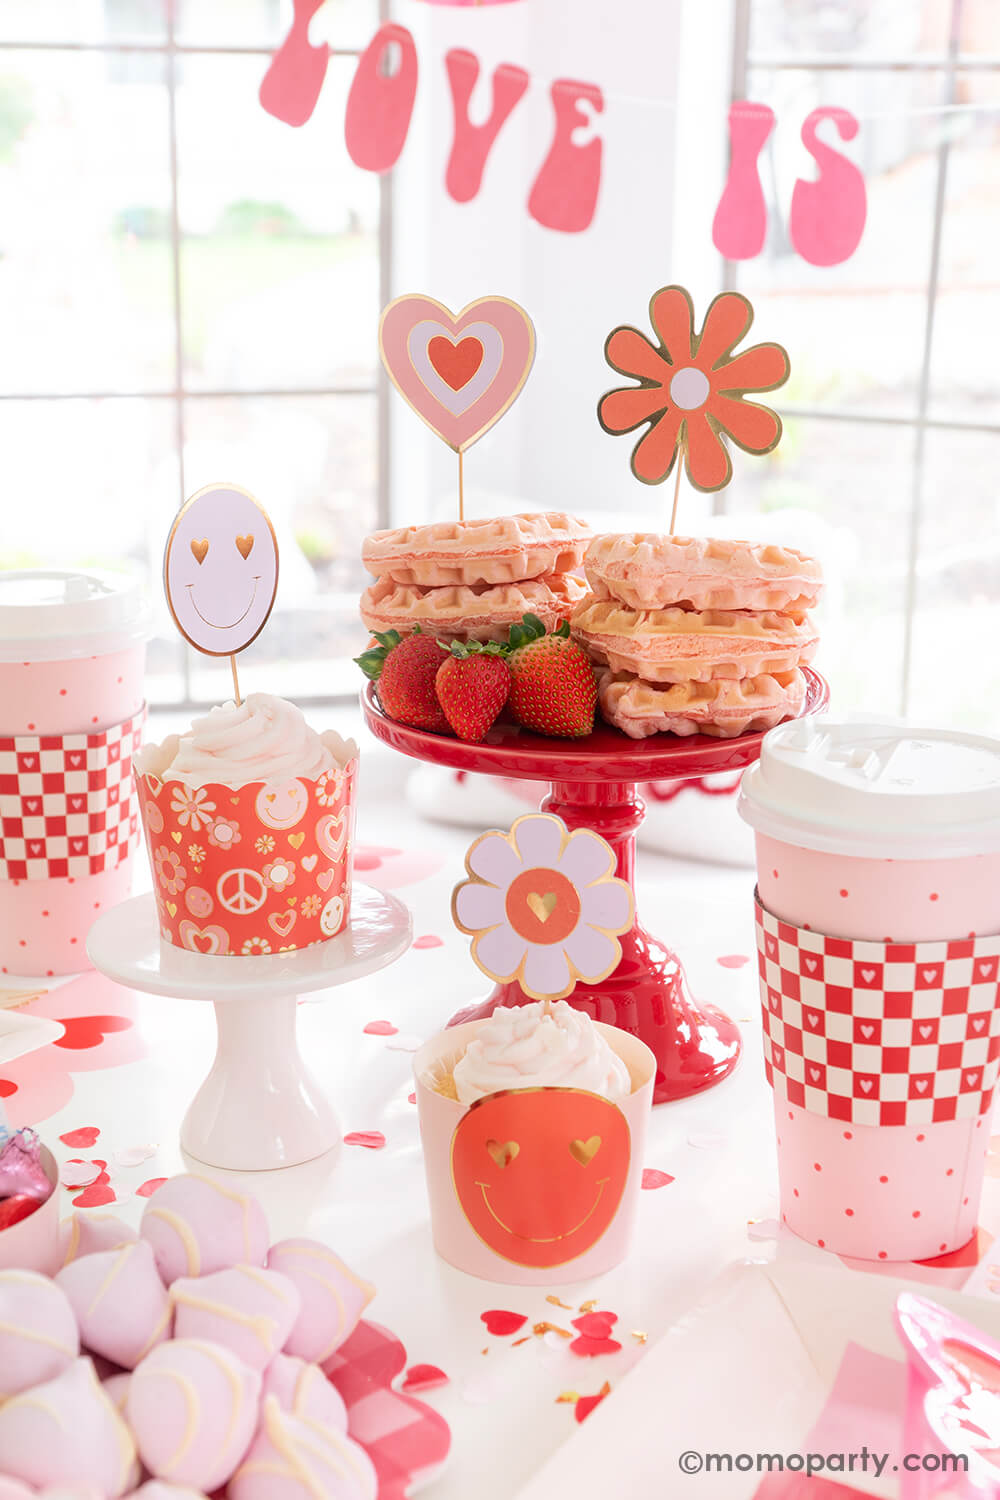 A close up shot of Momo Party's Groovy Valentine's party box featuring My Mind's Eye's love baking cups and toppers set in retro design of daisies, peace signs, smiley faces and hearts. In the back are some heart shaped pink waffles topped with retro toppers with strawberries on the side. Above the table hung "love is all you need" party banner in retro font type, with retro inspired tableware, it makes a perfect inspo for a fun and groovy Valentine's Day celebration! 